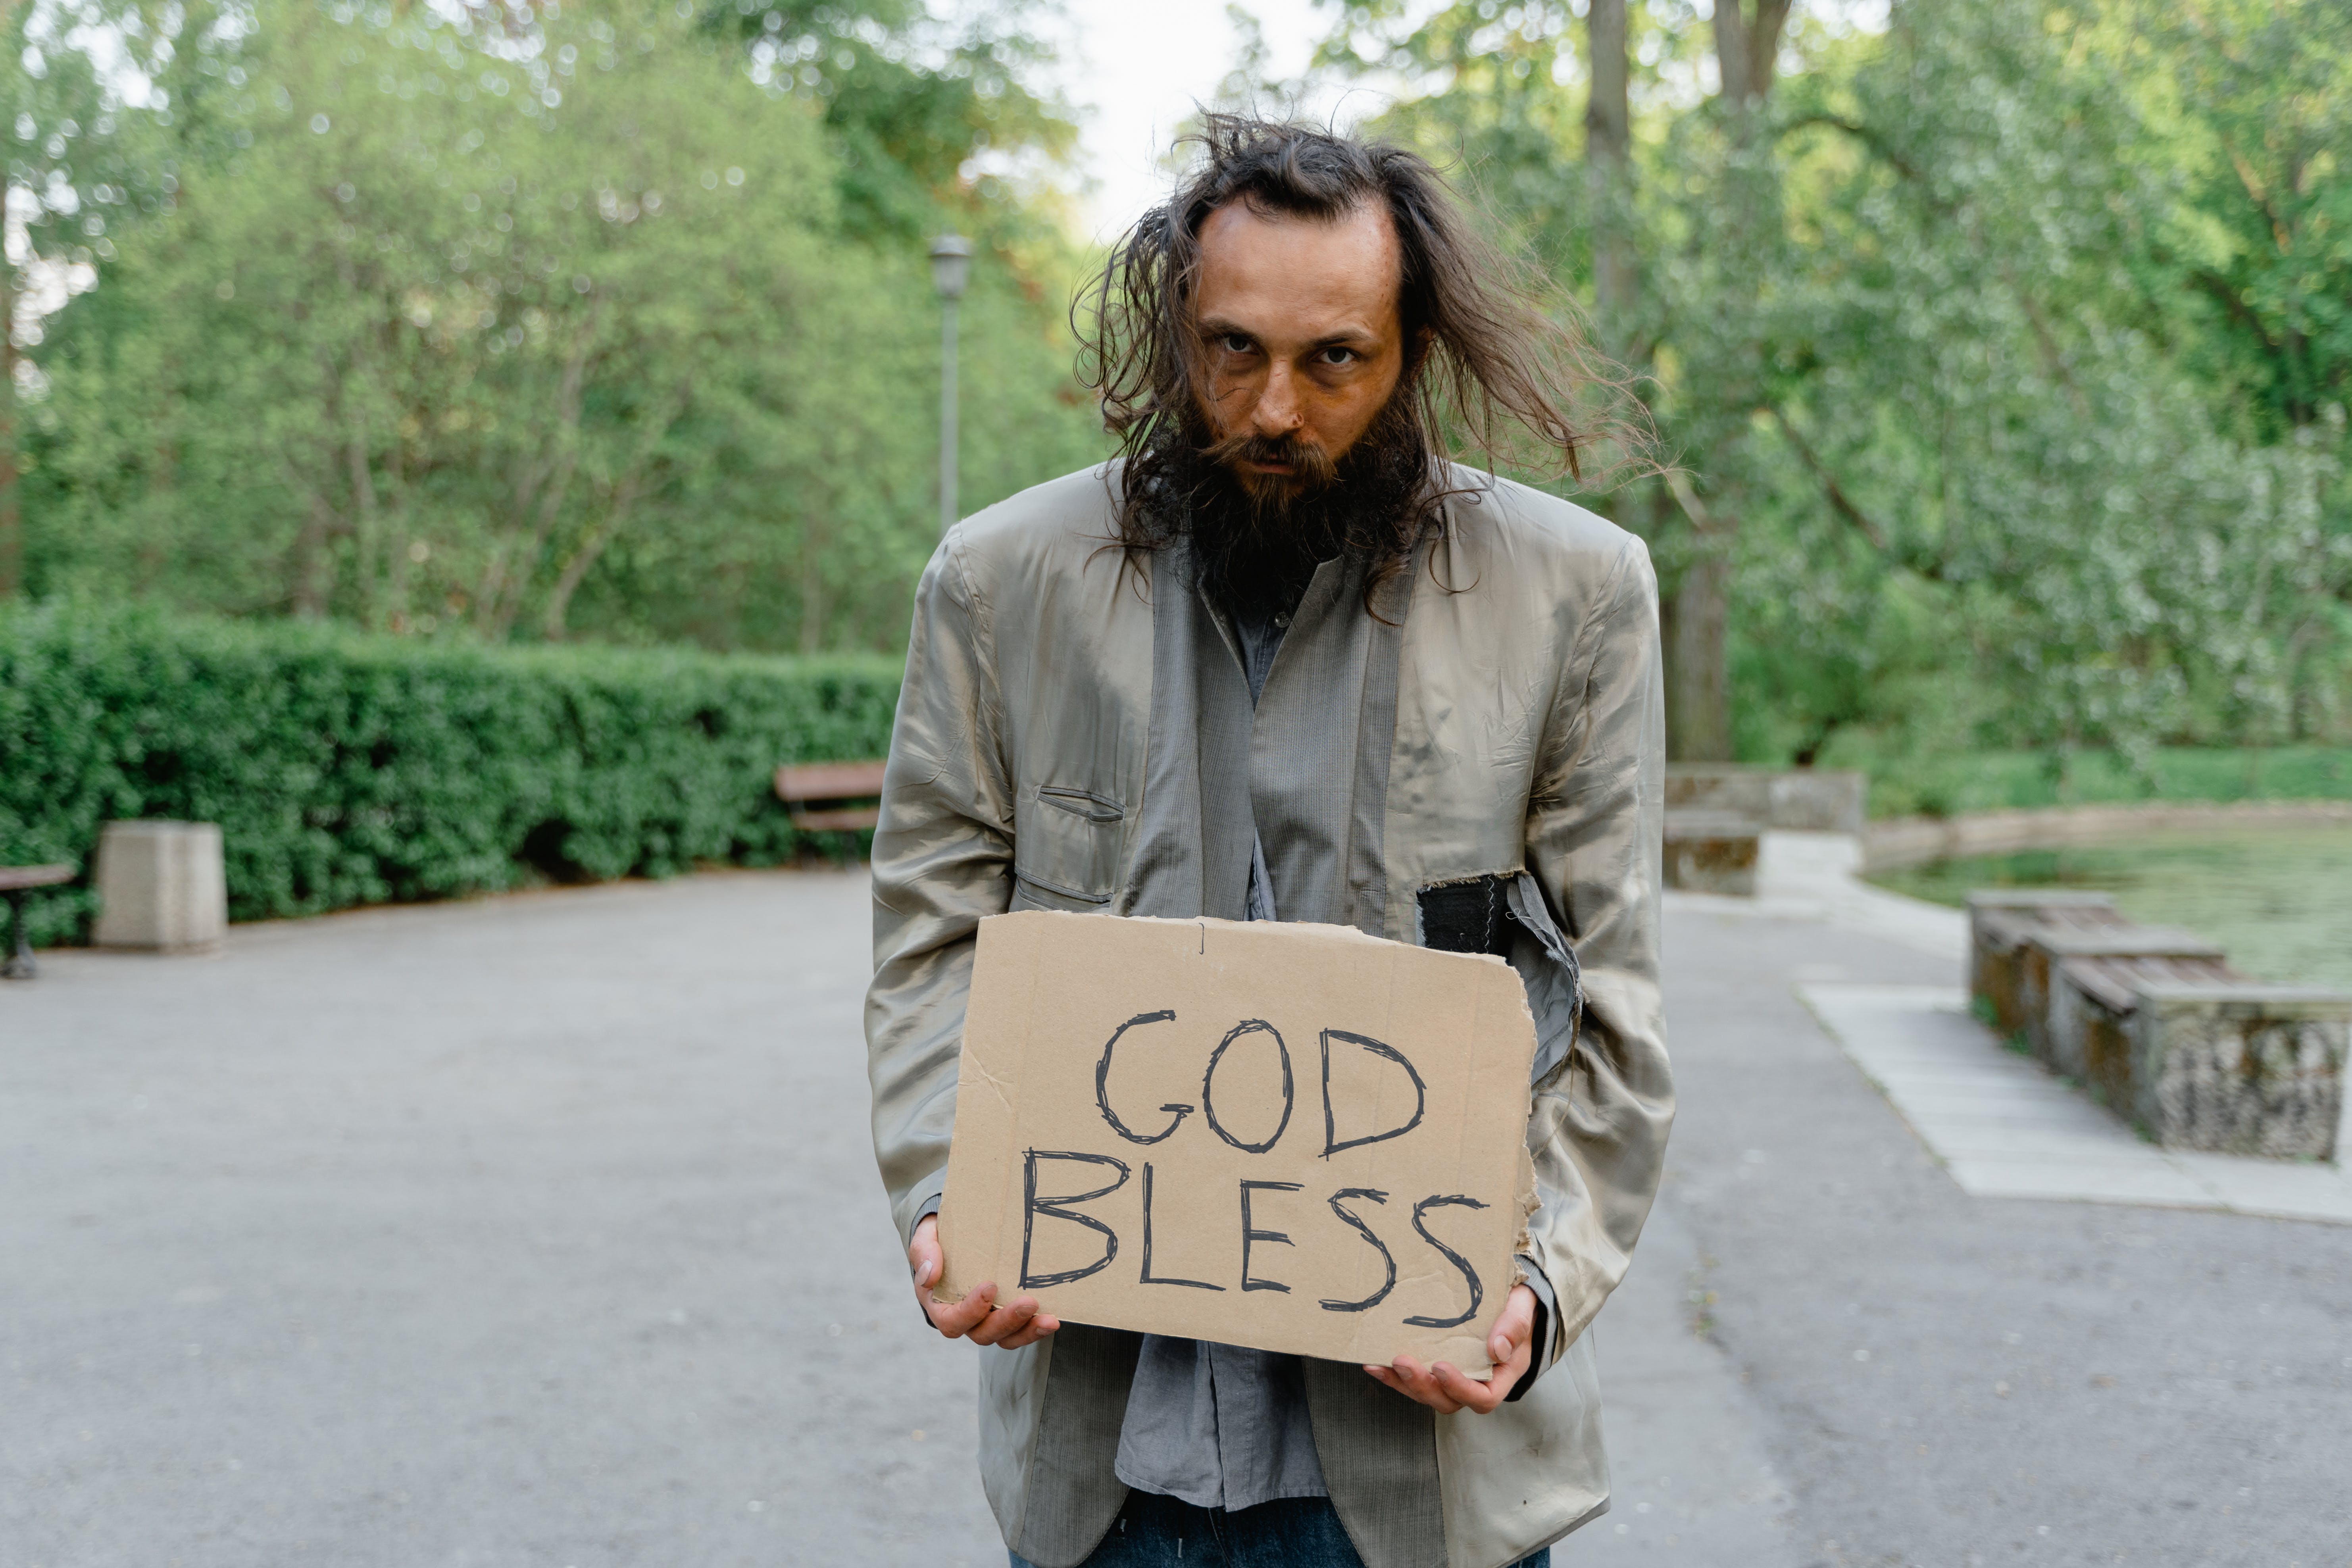 A homeless man standing with a sign on the road | Source: Pexels